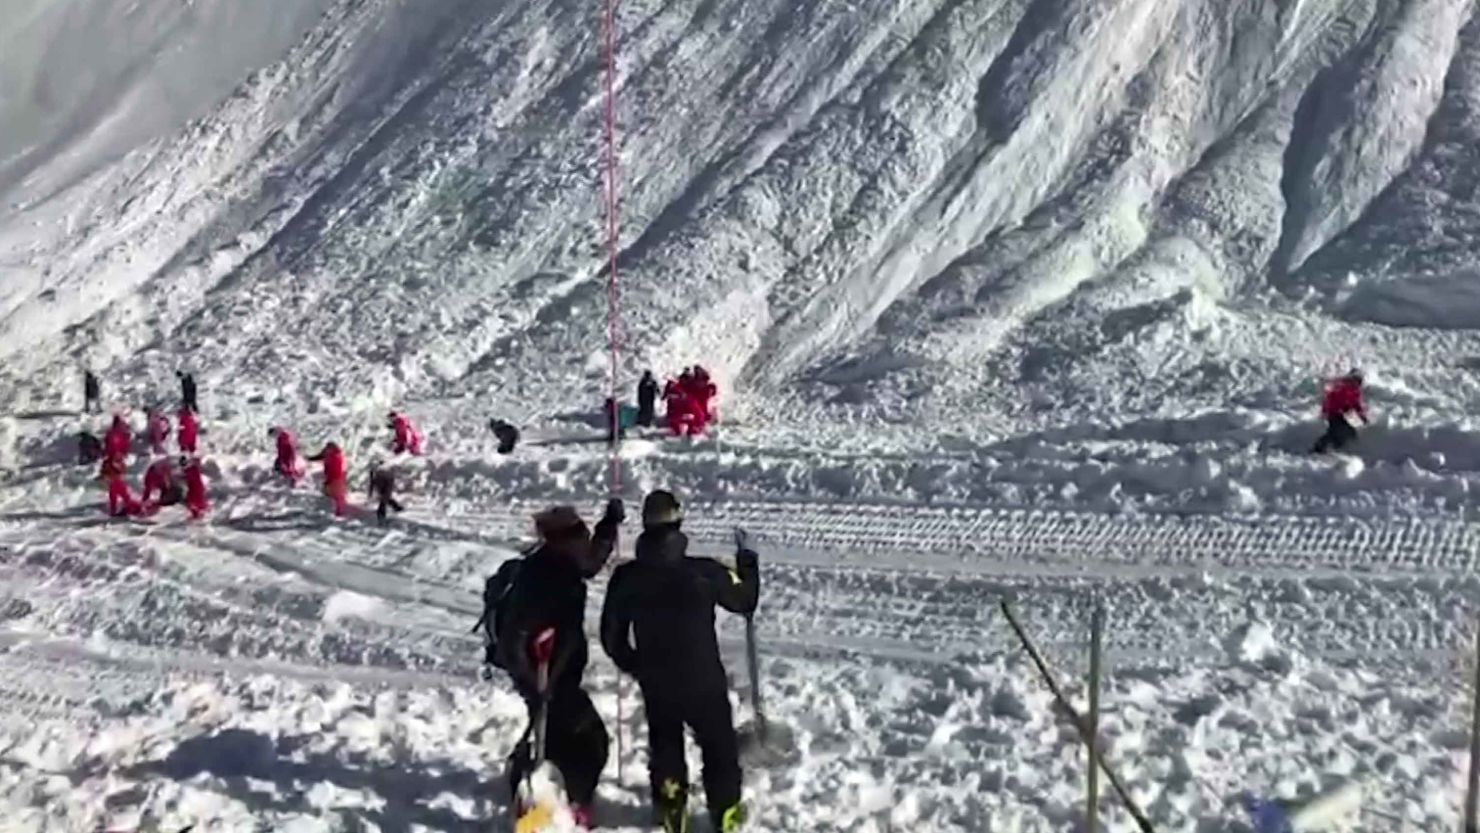 A team of 40 rescuers are looking for missing people after the avalanche in Tignes.